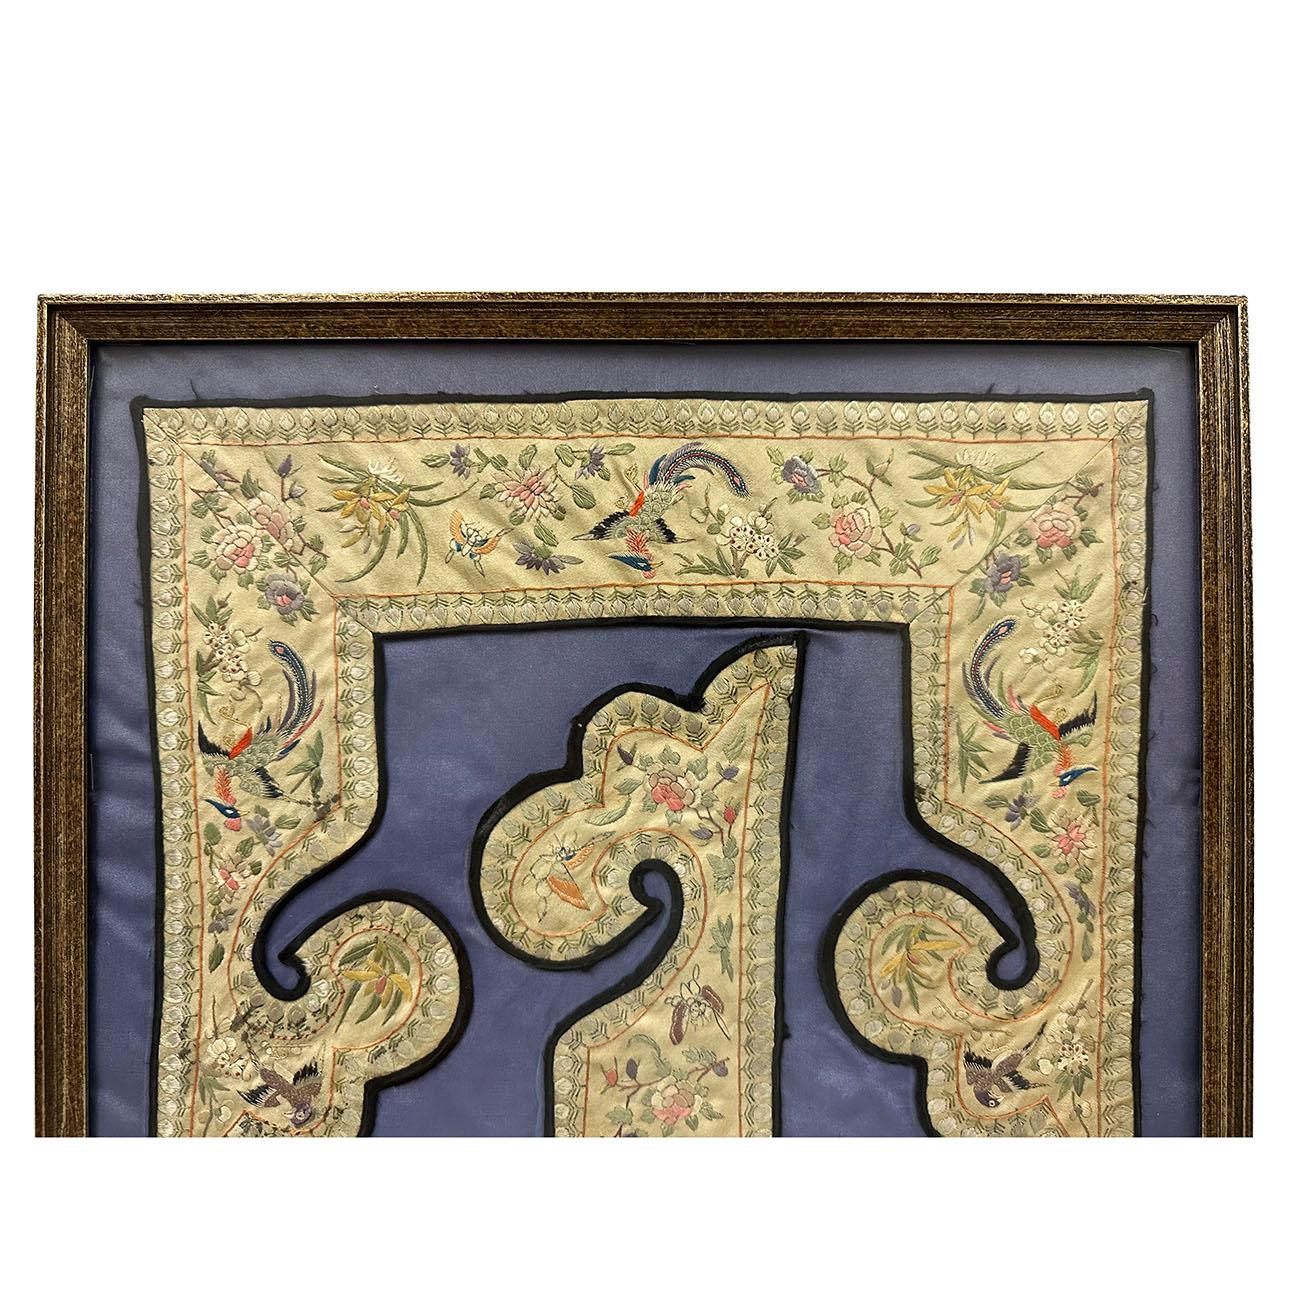 A group of three antique Chinese textiles embroidery arranged and professionally matted and framed. The museum quality display includes two Identical pieces symmetrically on the top and bottom of the frame, one piece in the center. There are